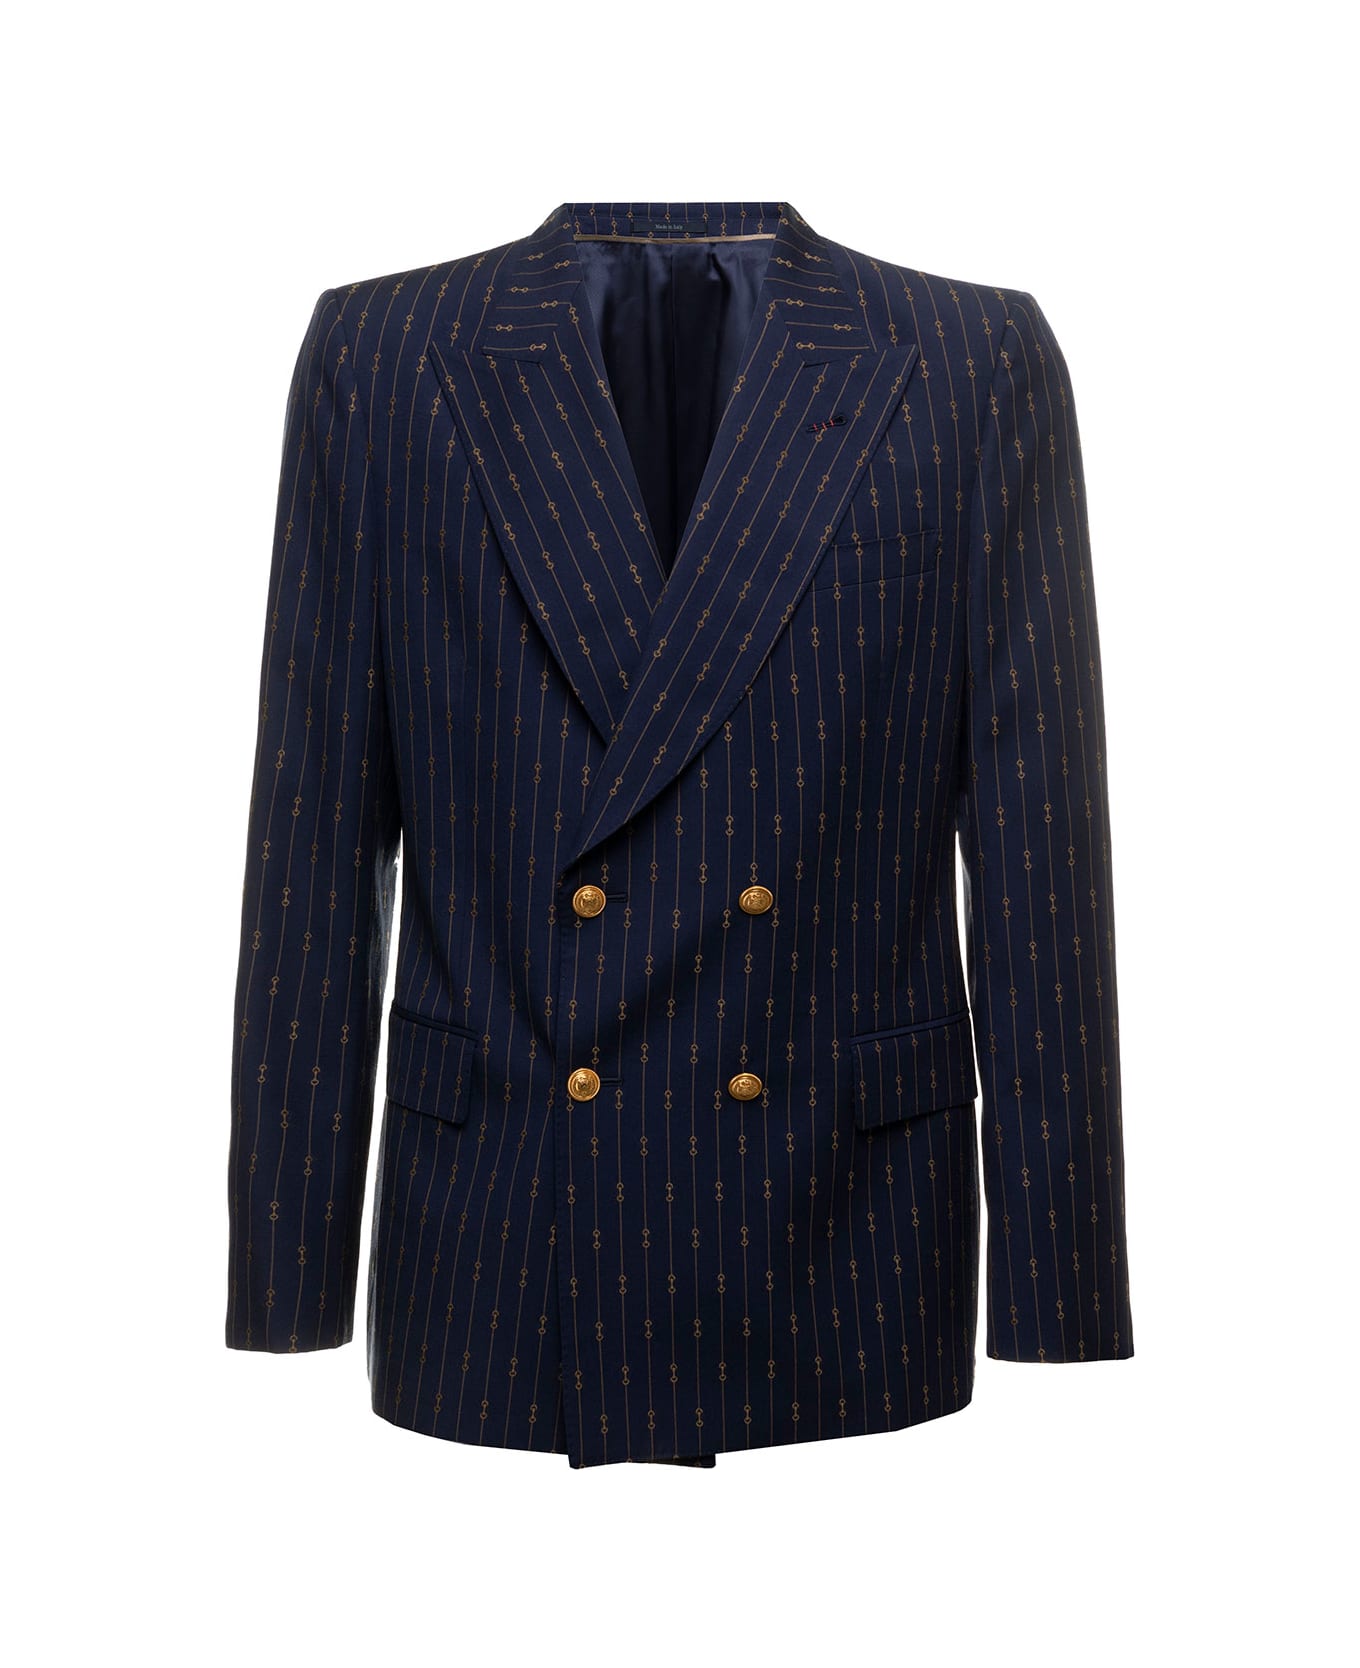 Gucci Man's Blue Printed Wool Double-breasted Blazer - Blu